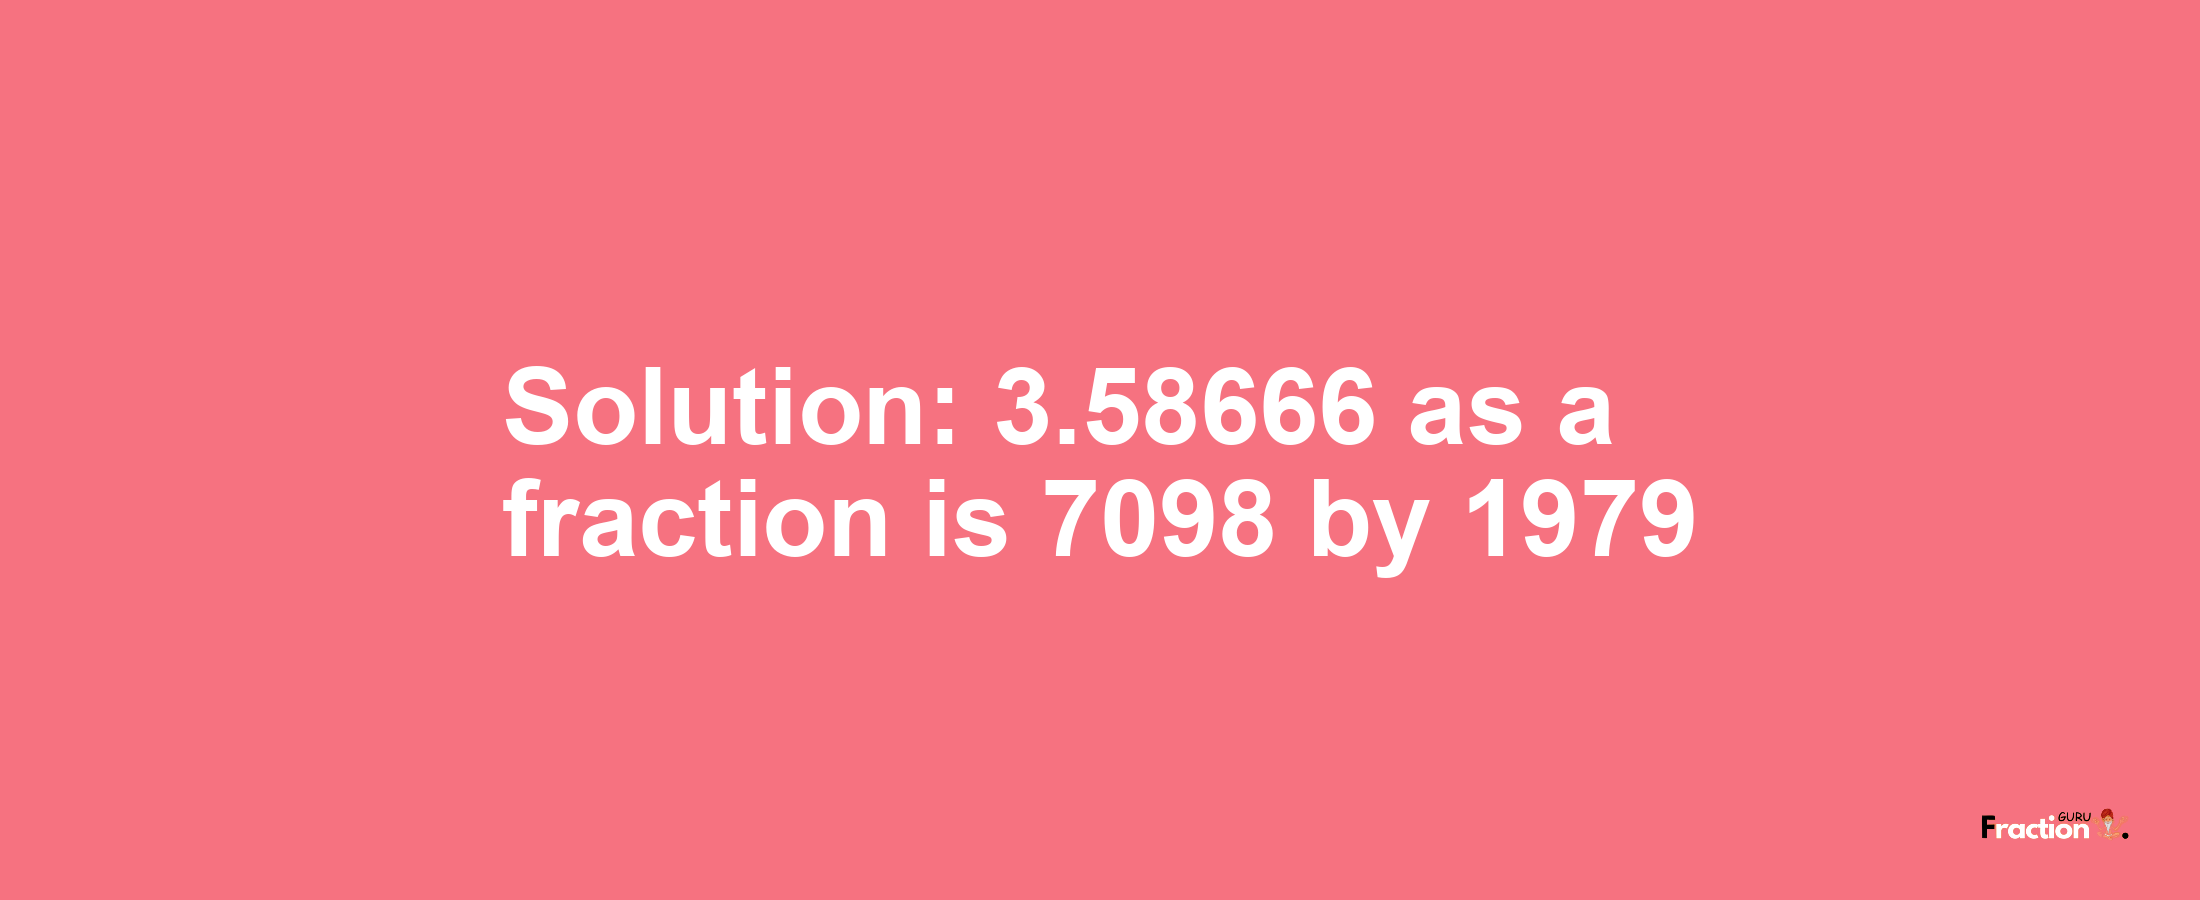 Solution:3.58666 as a fraction is 7098/1979